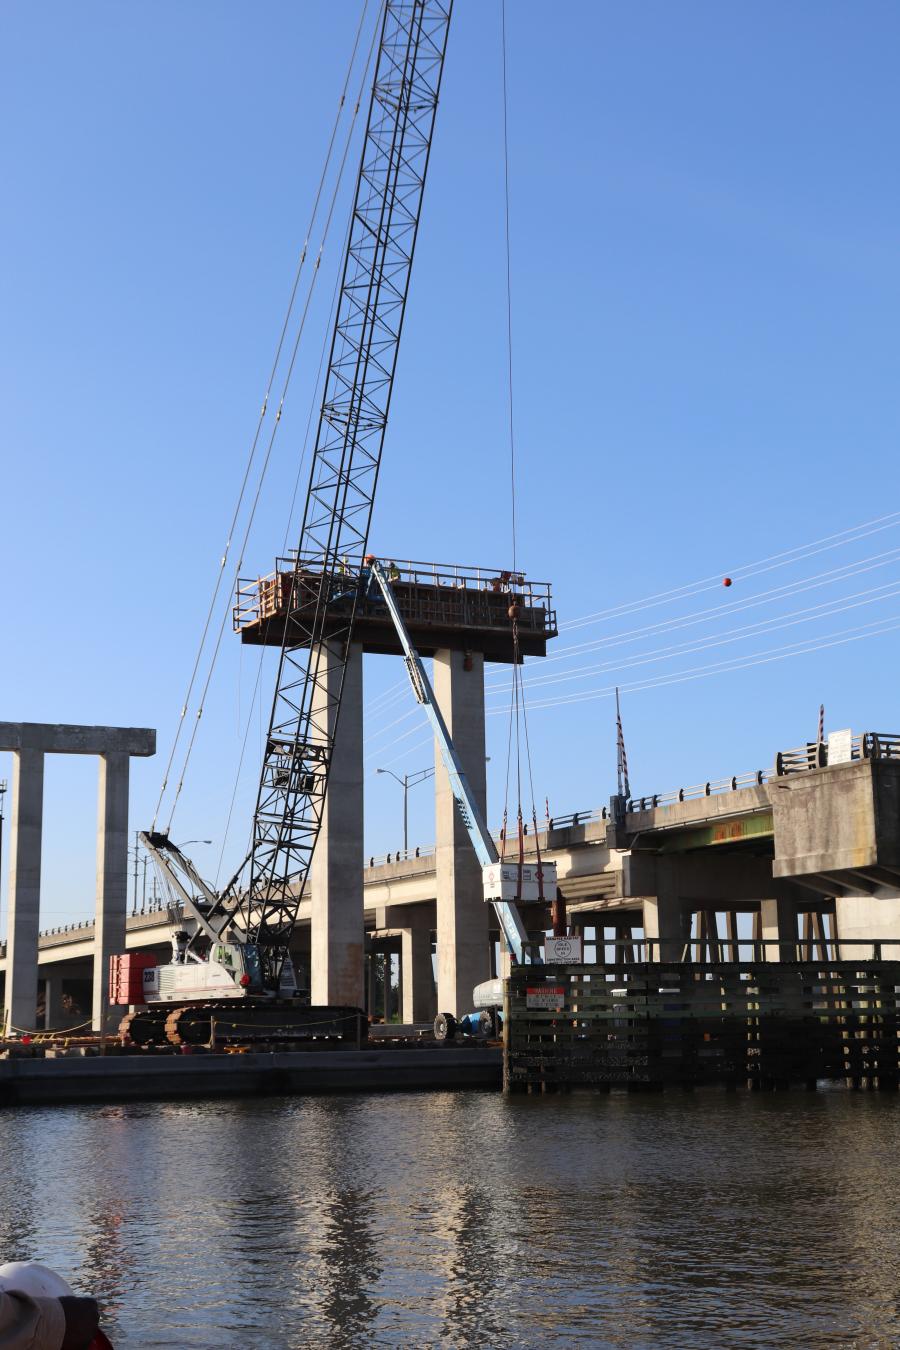 The Georgia Department of Transportation is investing $58.9 million to demolish the two Causton Bluff Bridges built in 1963 over the Wilmington River along Islands Expressway in Chatham County.